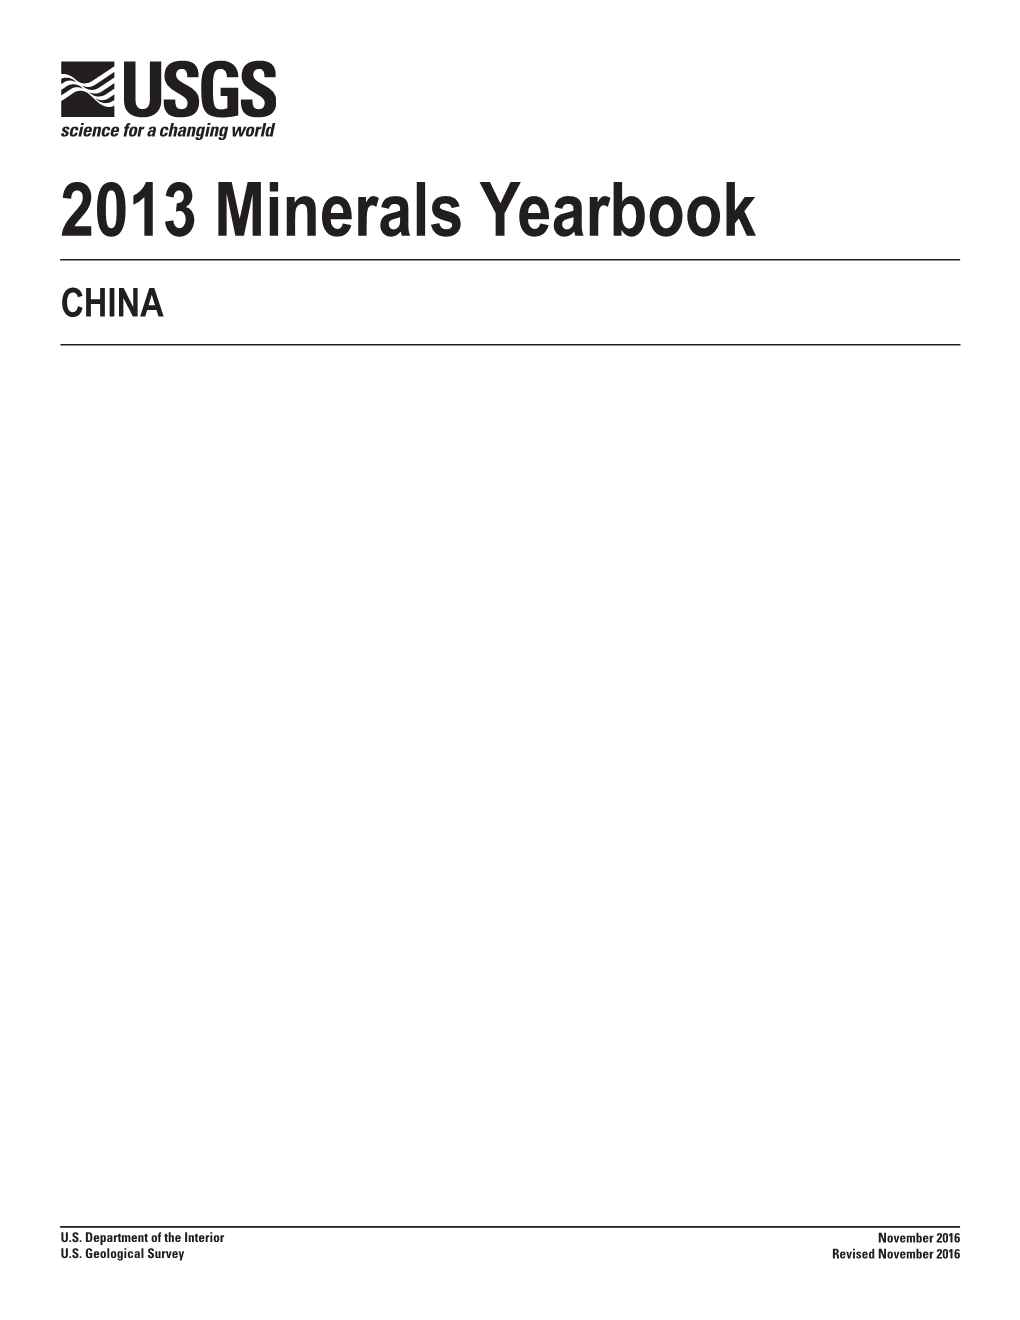 The Mineral Industry of China in 2013